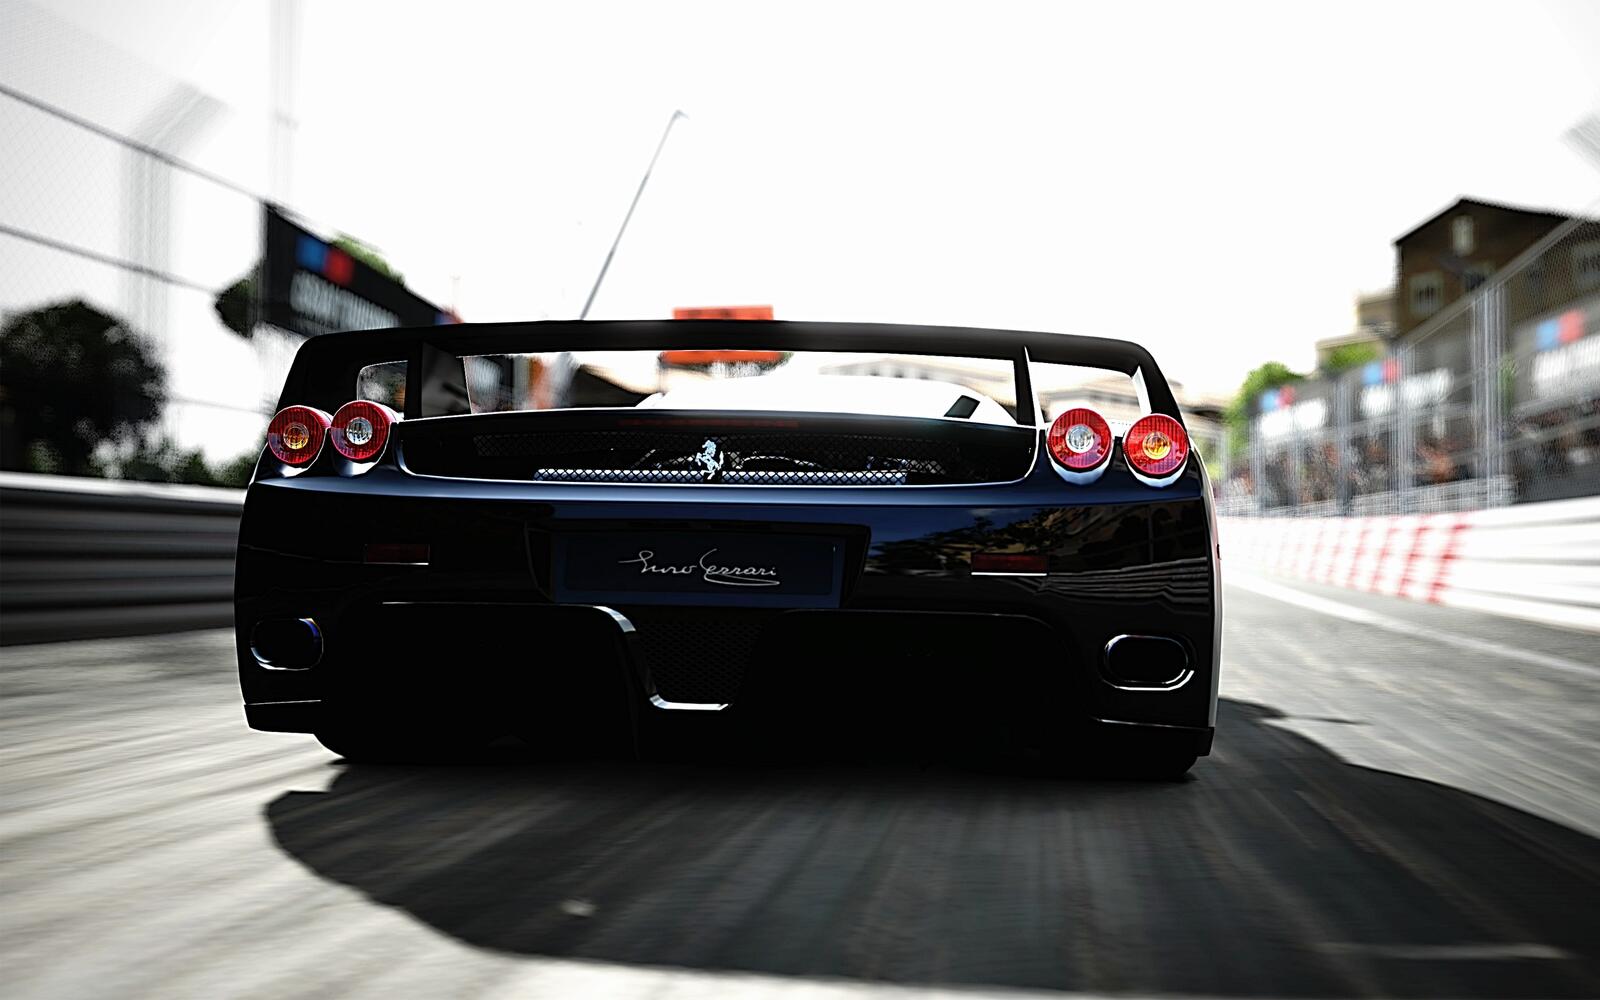 Wallpapers Ferrari supercar view from behind on the desktop